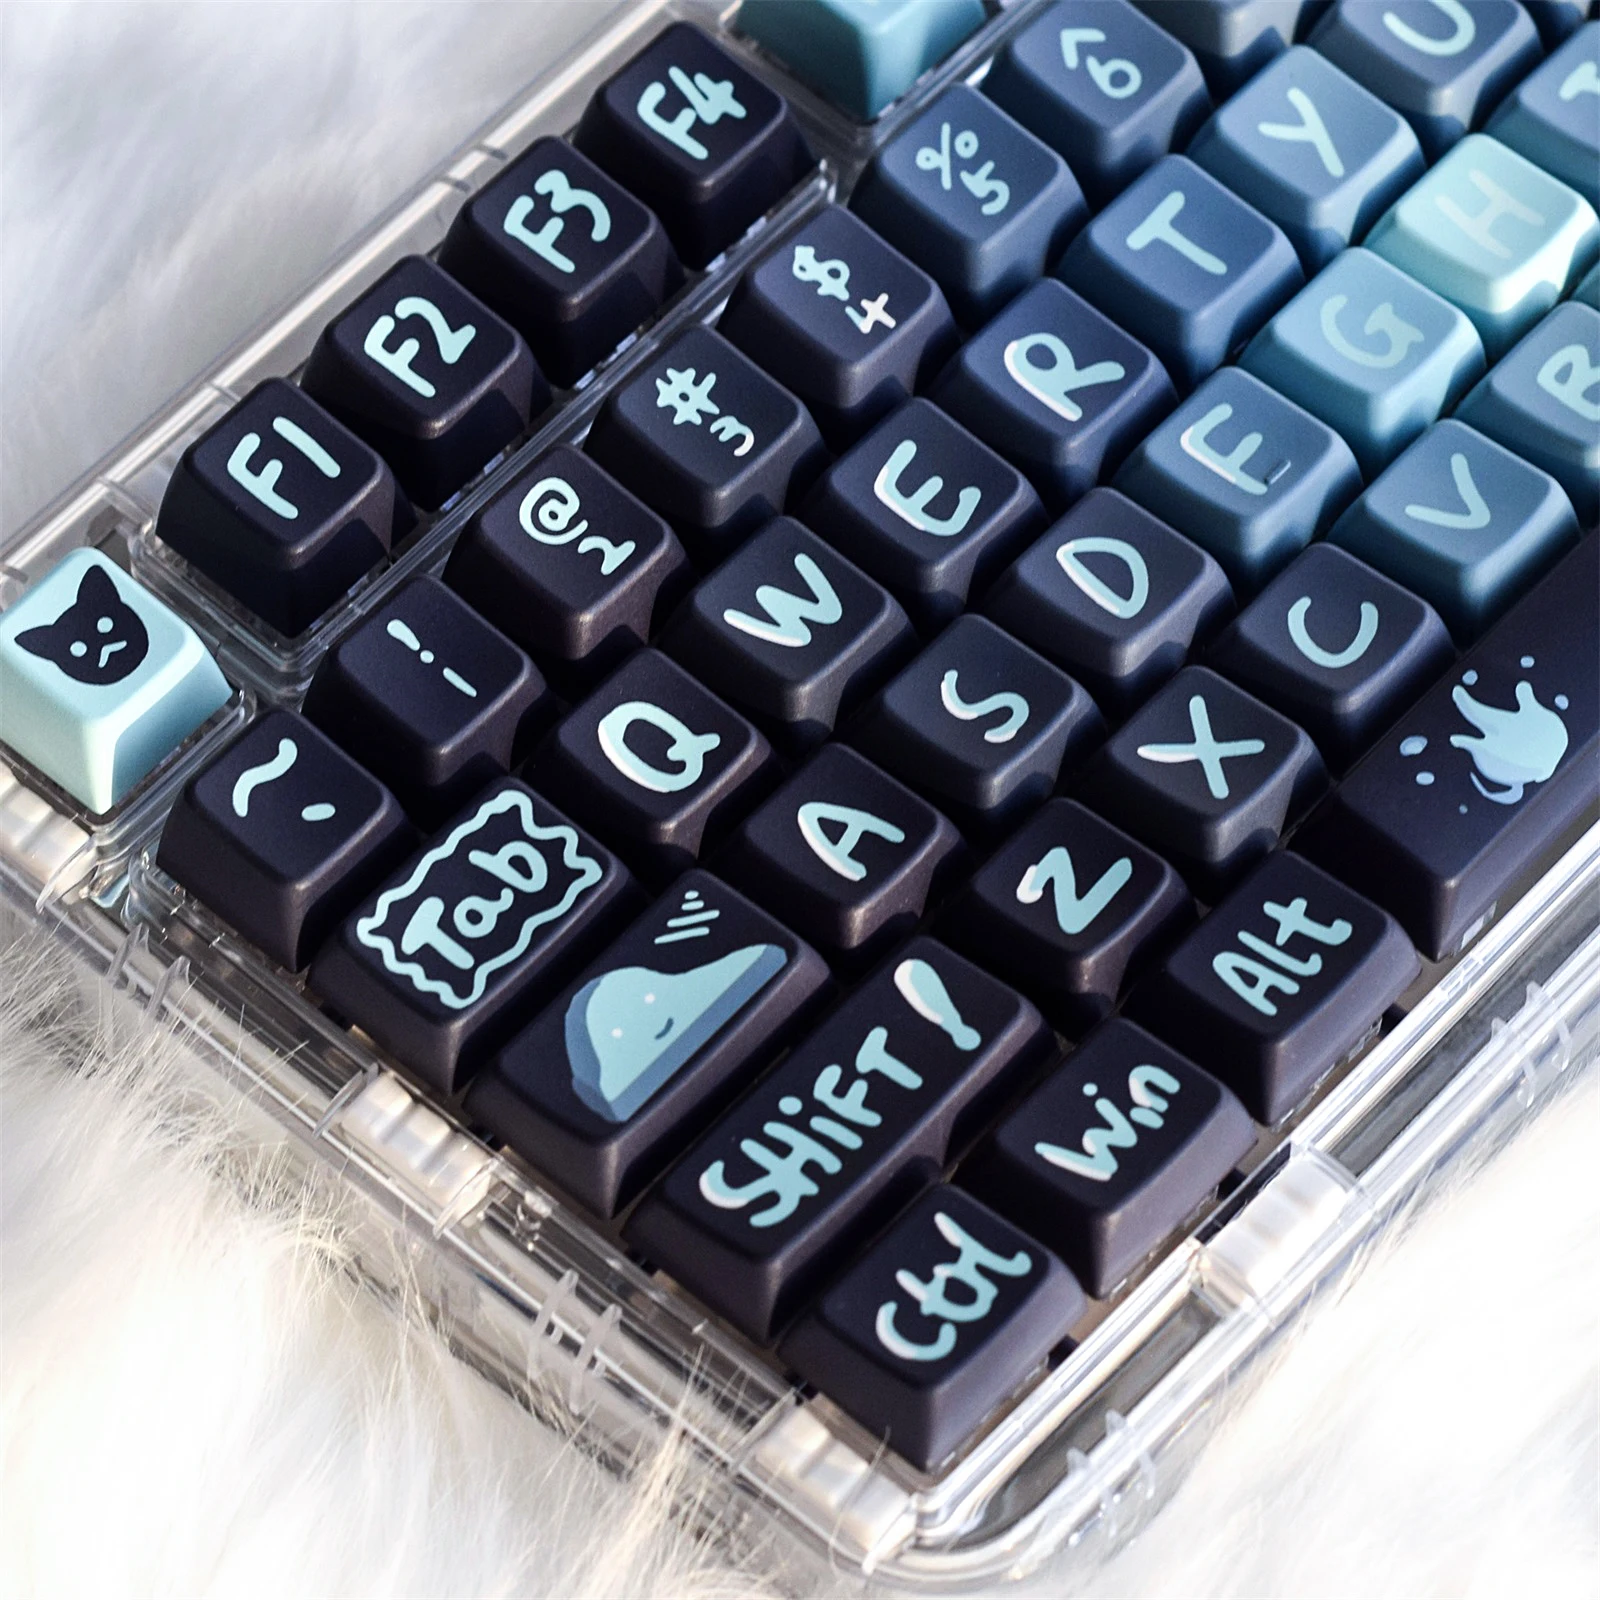 Ghost Cat Key Caps PBT OEM Profile For Cherry MX Mechanical Keyboard Double-shot Cute Personalized Backlit DYE-SUB Keycaps Set